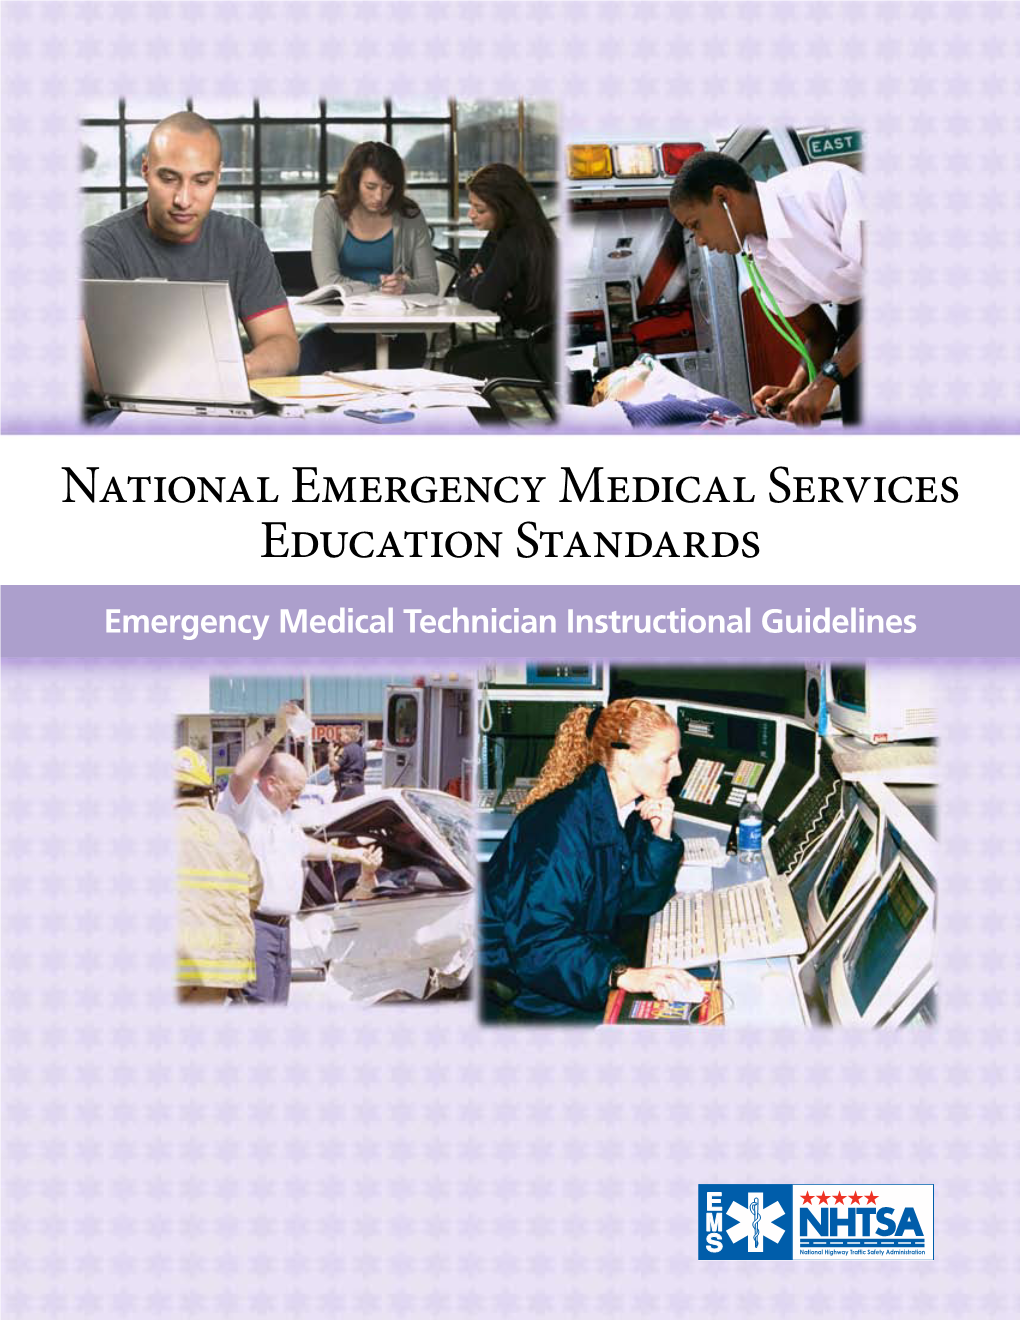 EMT Instructional Guidelines in This Section Include All the Topics and Material at the EMR Level PLUS the Following Material